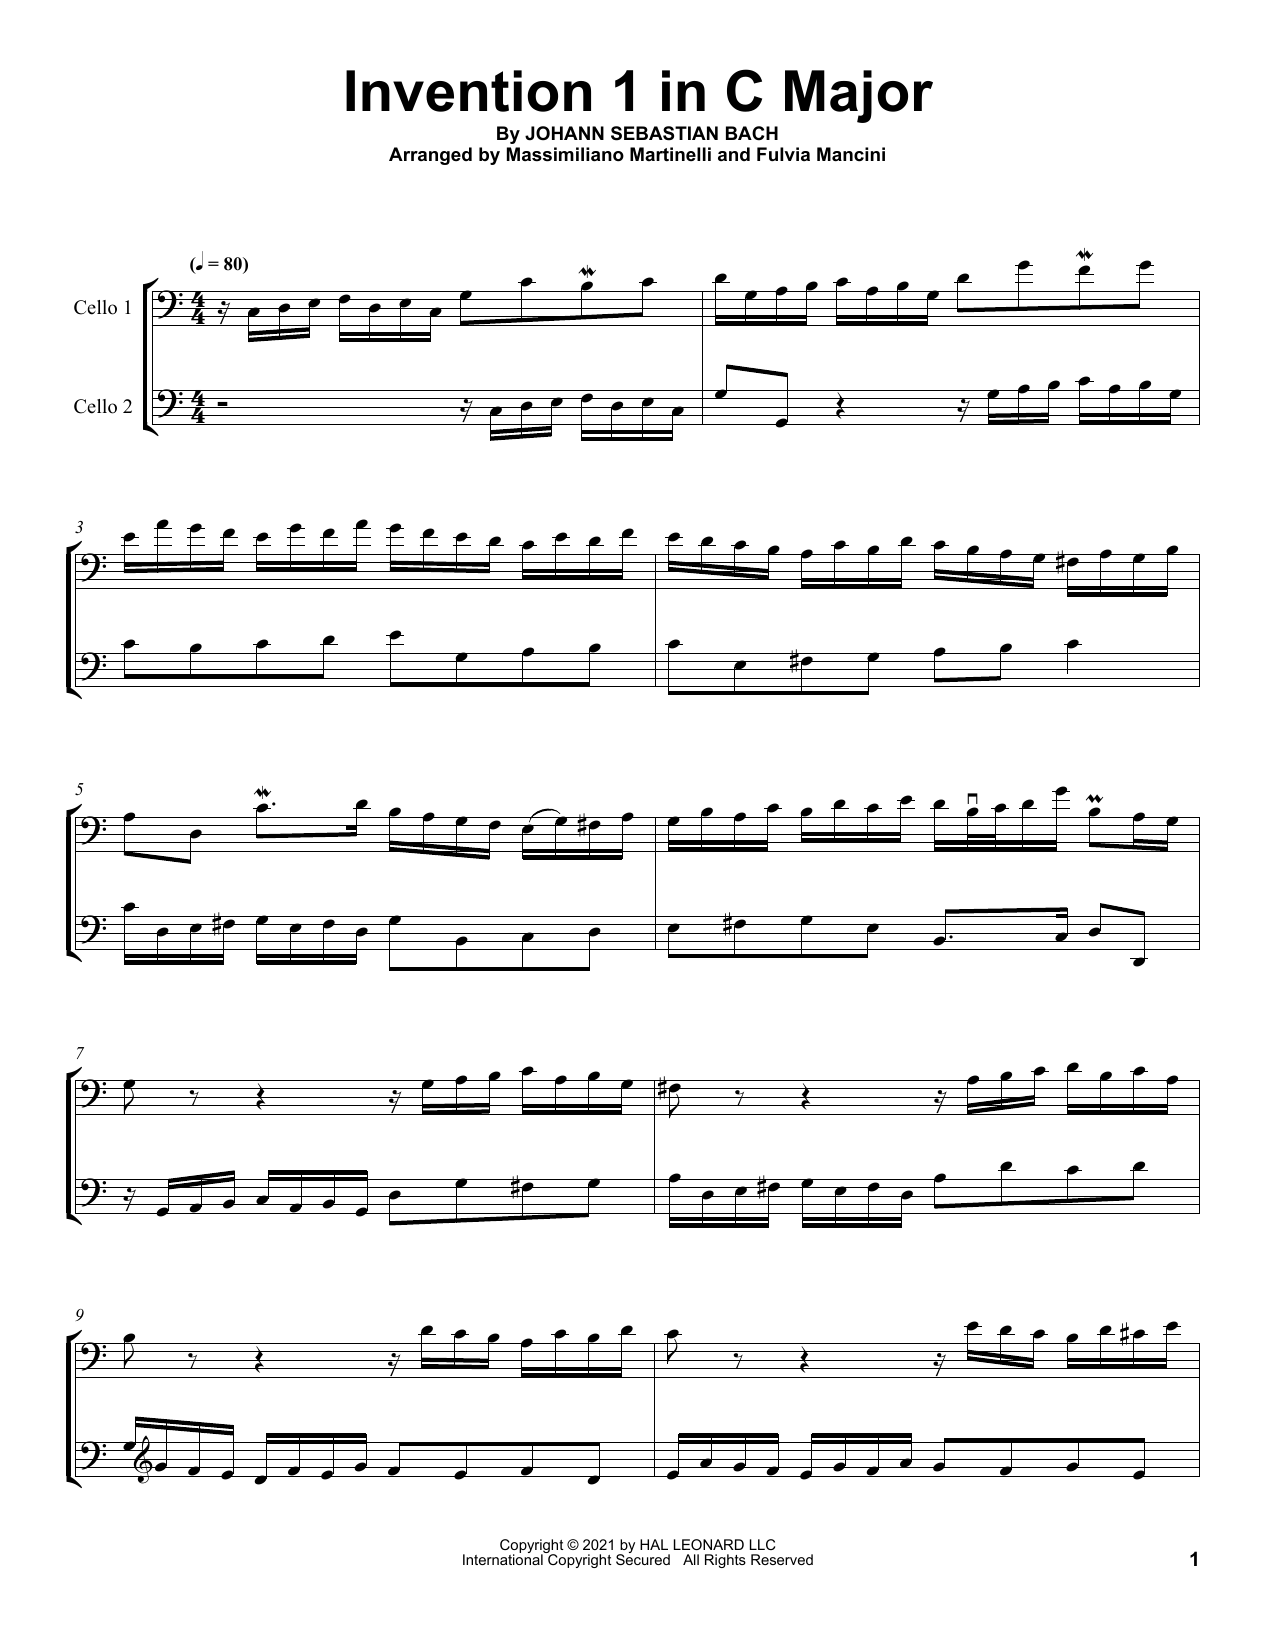 Download Mr & Mrs Cello Invention 1 In C Major Sheet Music